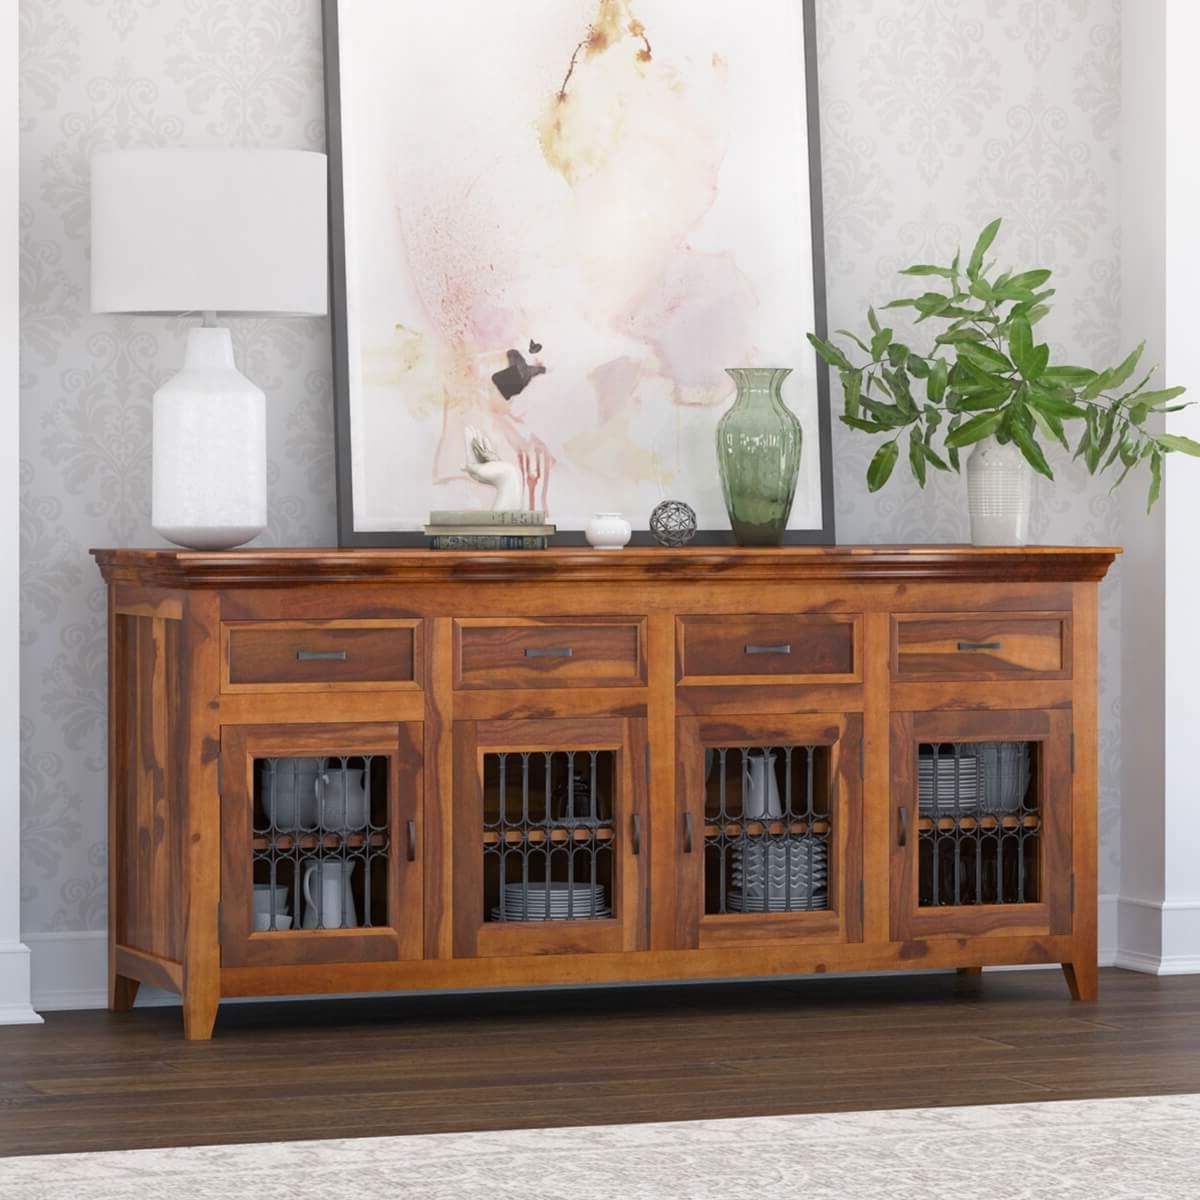 [%solid Wood Buffets And Sideboards Clearance, Save 51%. Within Newest Solid Wood Buffet Sideboards|solid Wood Buffet Sideboards With Regard To Widely Used Solid Wood Buffets And Sideboards Clearance, Save 51%.|recent Solid Wood Buffet Sideboards Regarding Solid Wood Buffets And Sideboards Clearance, Save 51%.|preferred Solid Wood Buffets And Sideboards Clearance, Save 51%. For Solid Wood Buffet Sideboards%] (Photo 7 of 15)